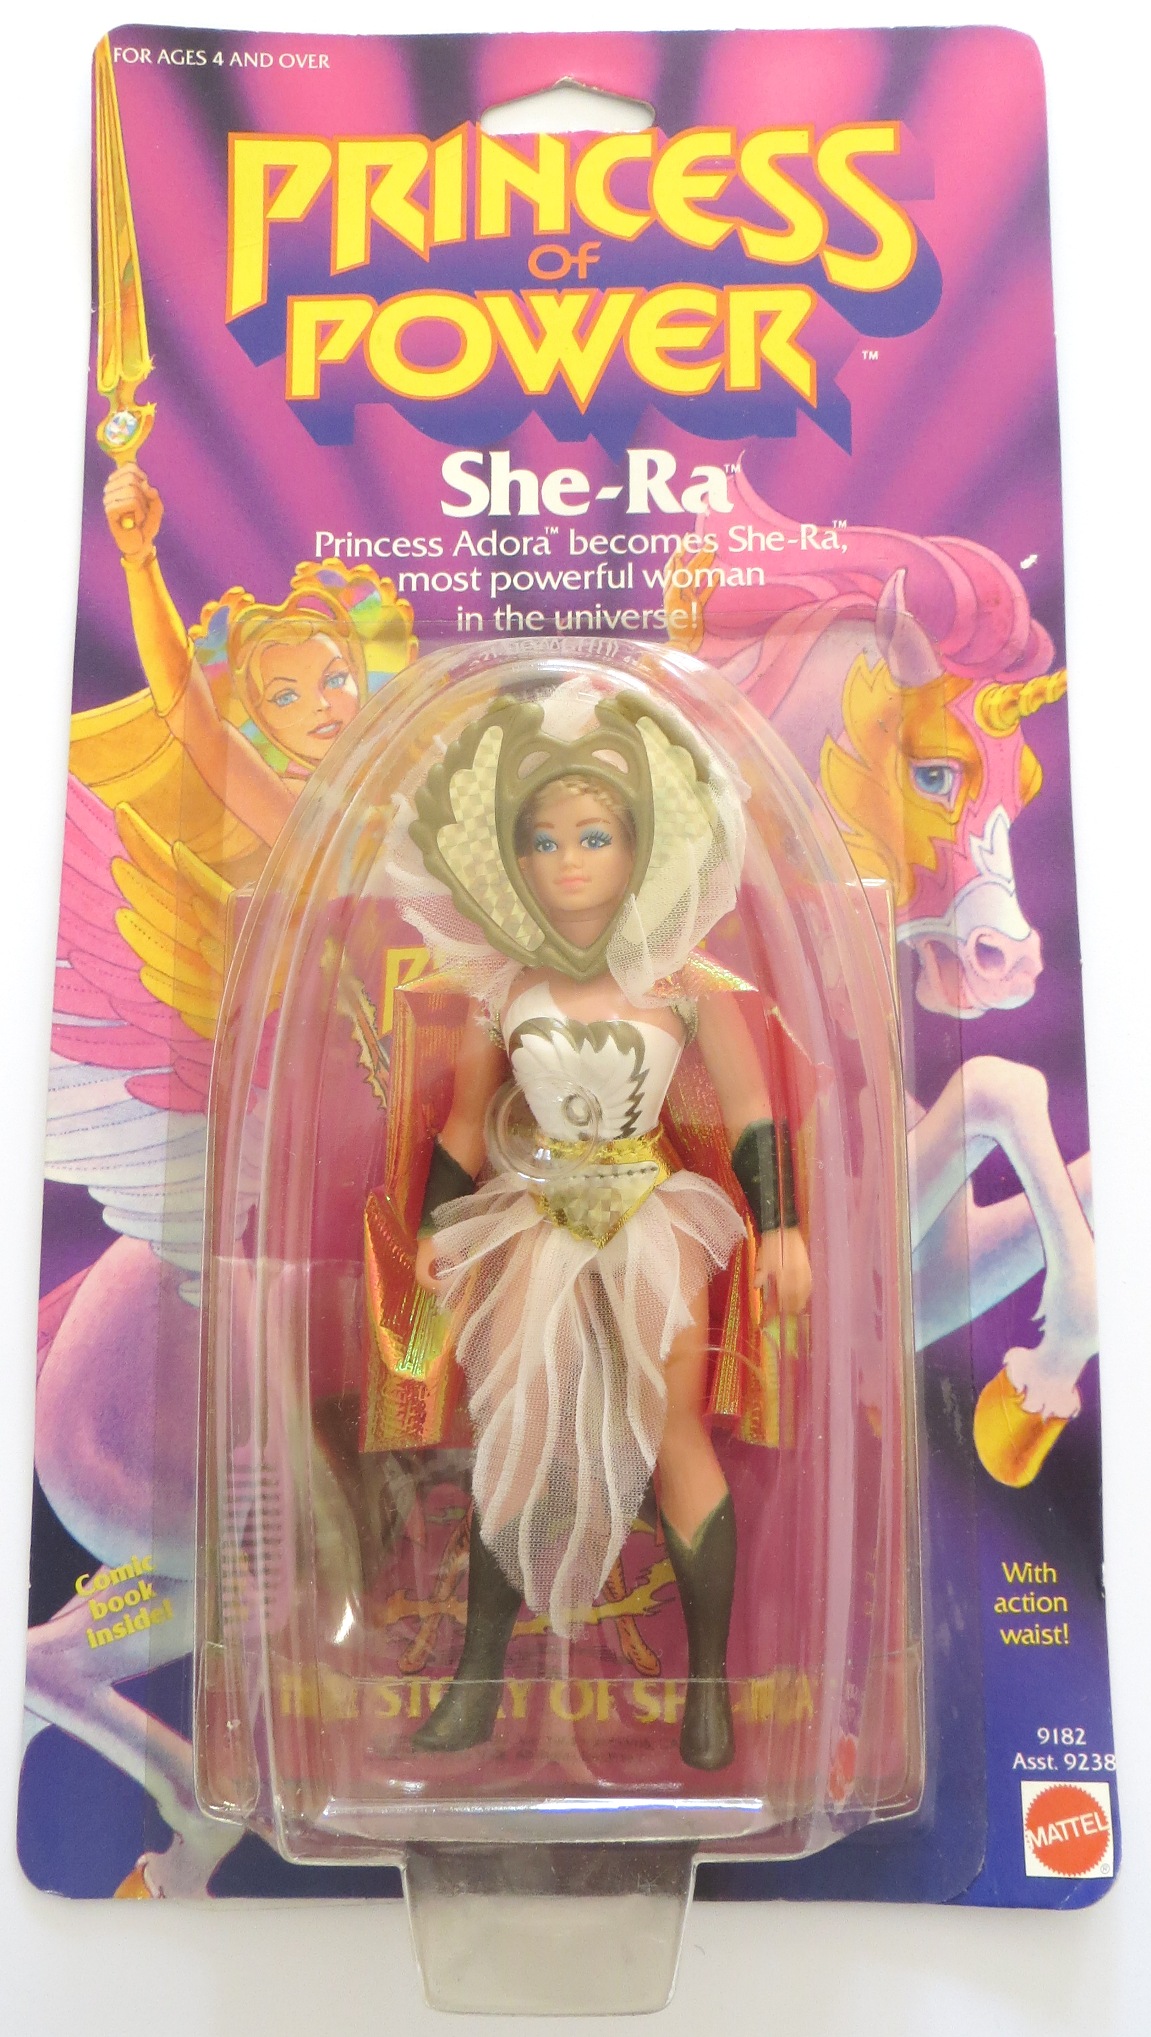 MULTI-LISTING She-Ra Princess of Power 1980s Vintage Action figures incomplete 